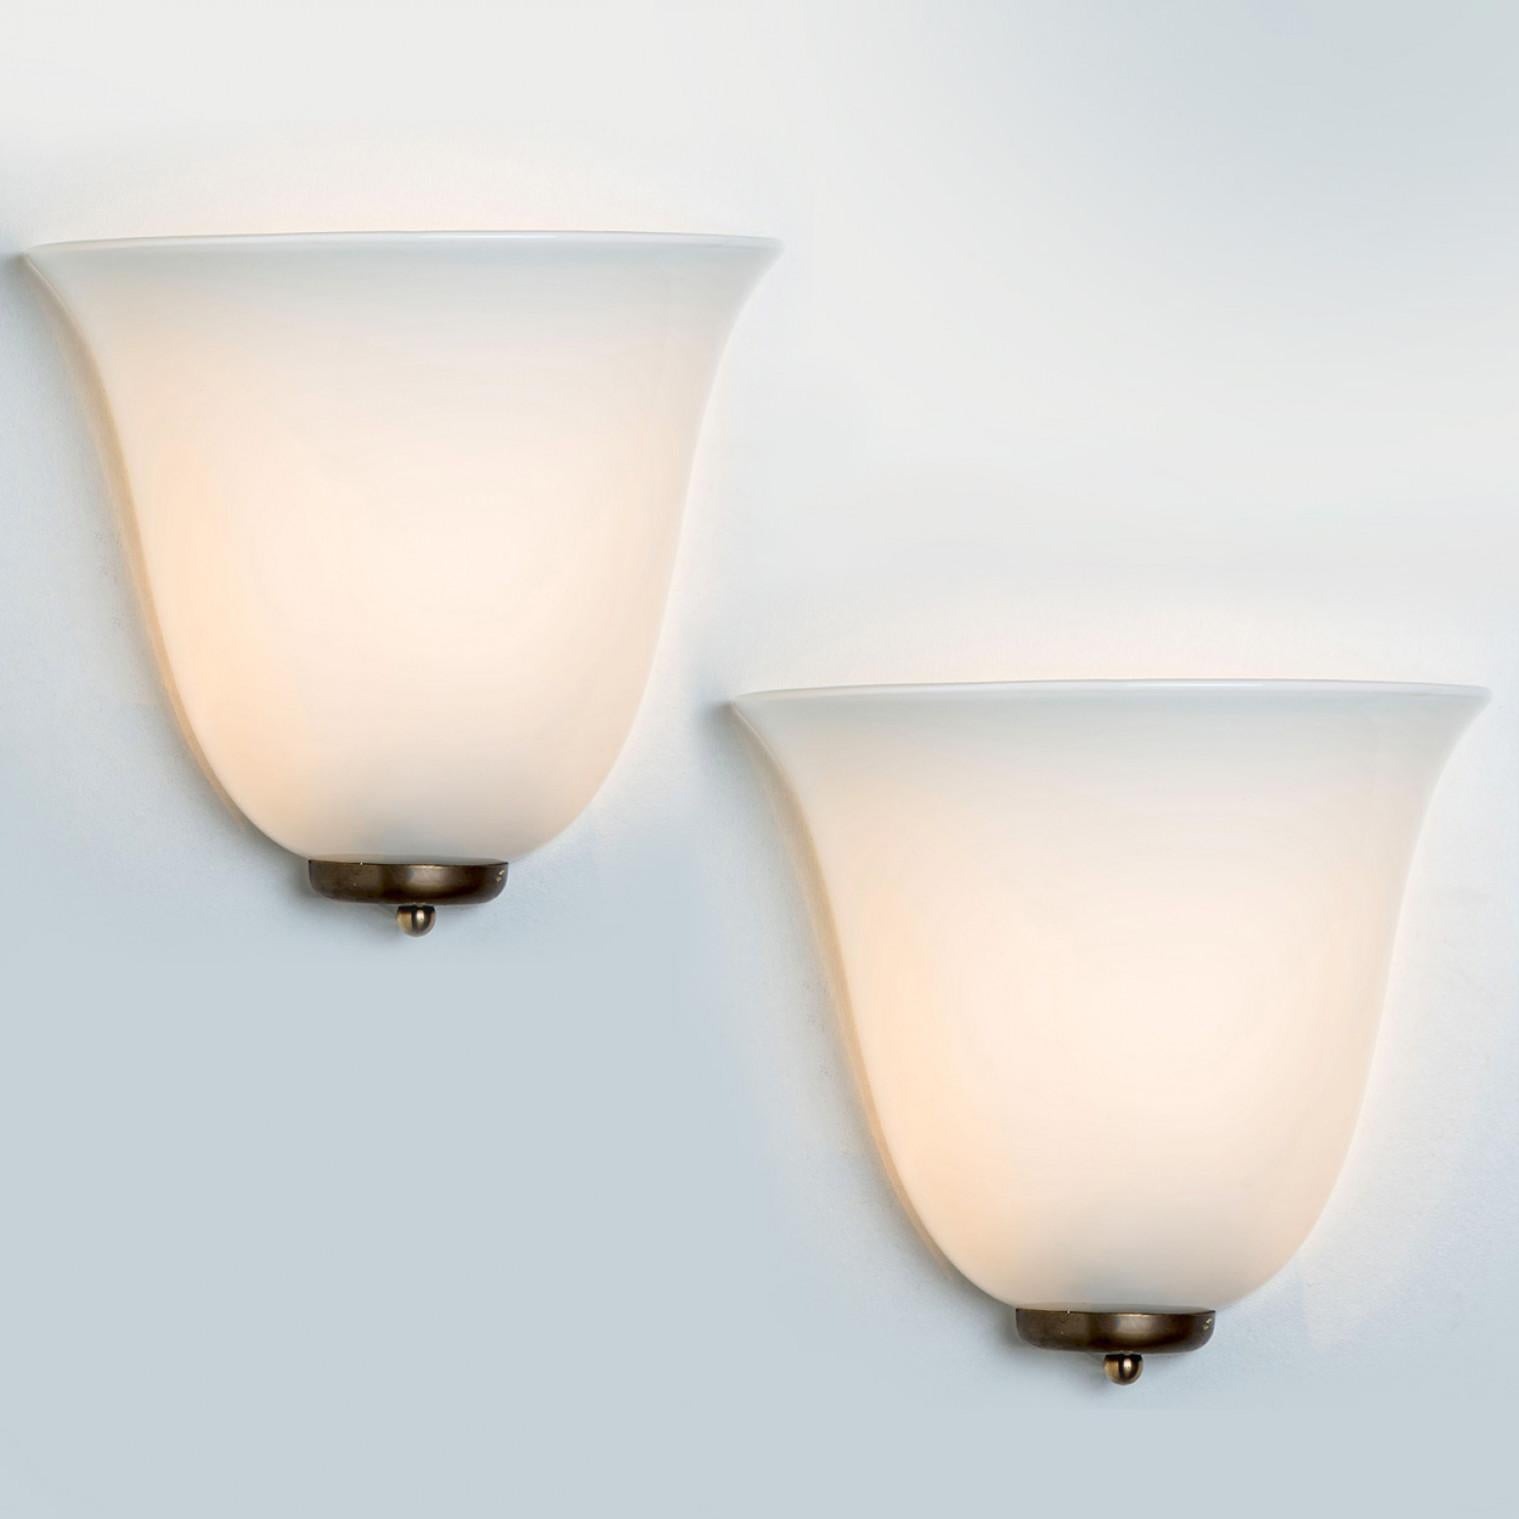 Wonderful hand blown Doria wall lamps. Manufactured in the 1960s. With a beautiful shell of opal glass, and a small brass base.
The stylish elegance of this lamp suits many environments, from mid century to Hollywood Regency, from Danish modern to